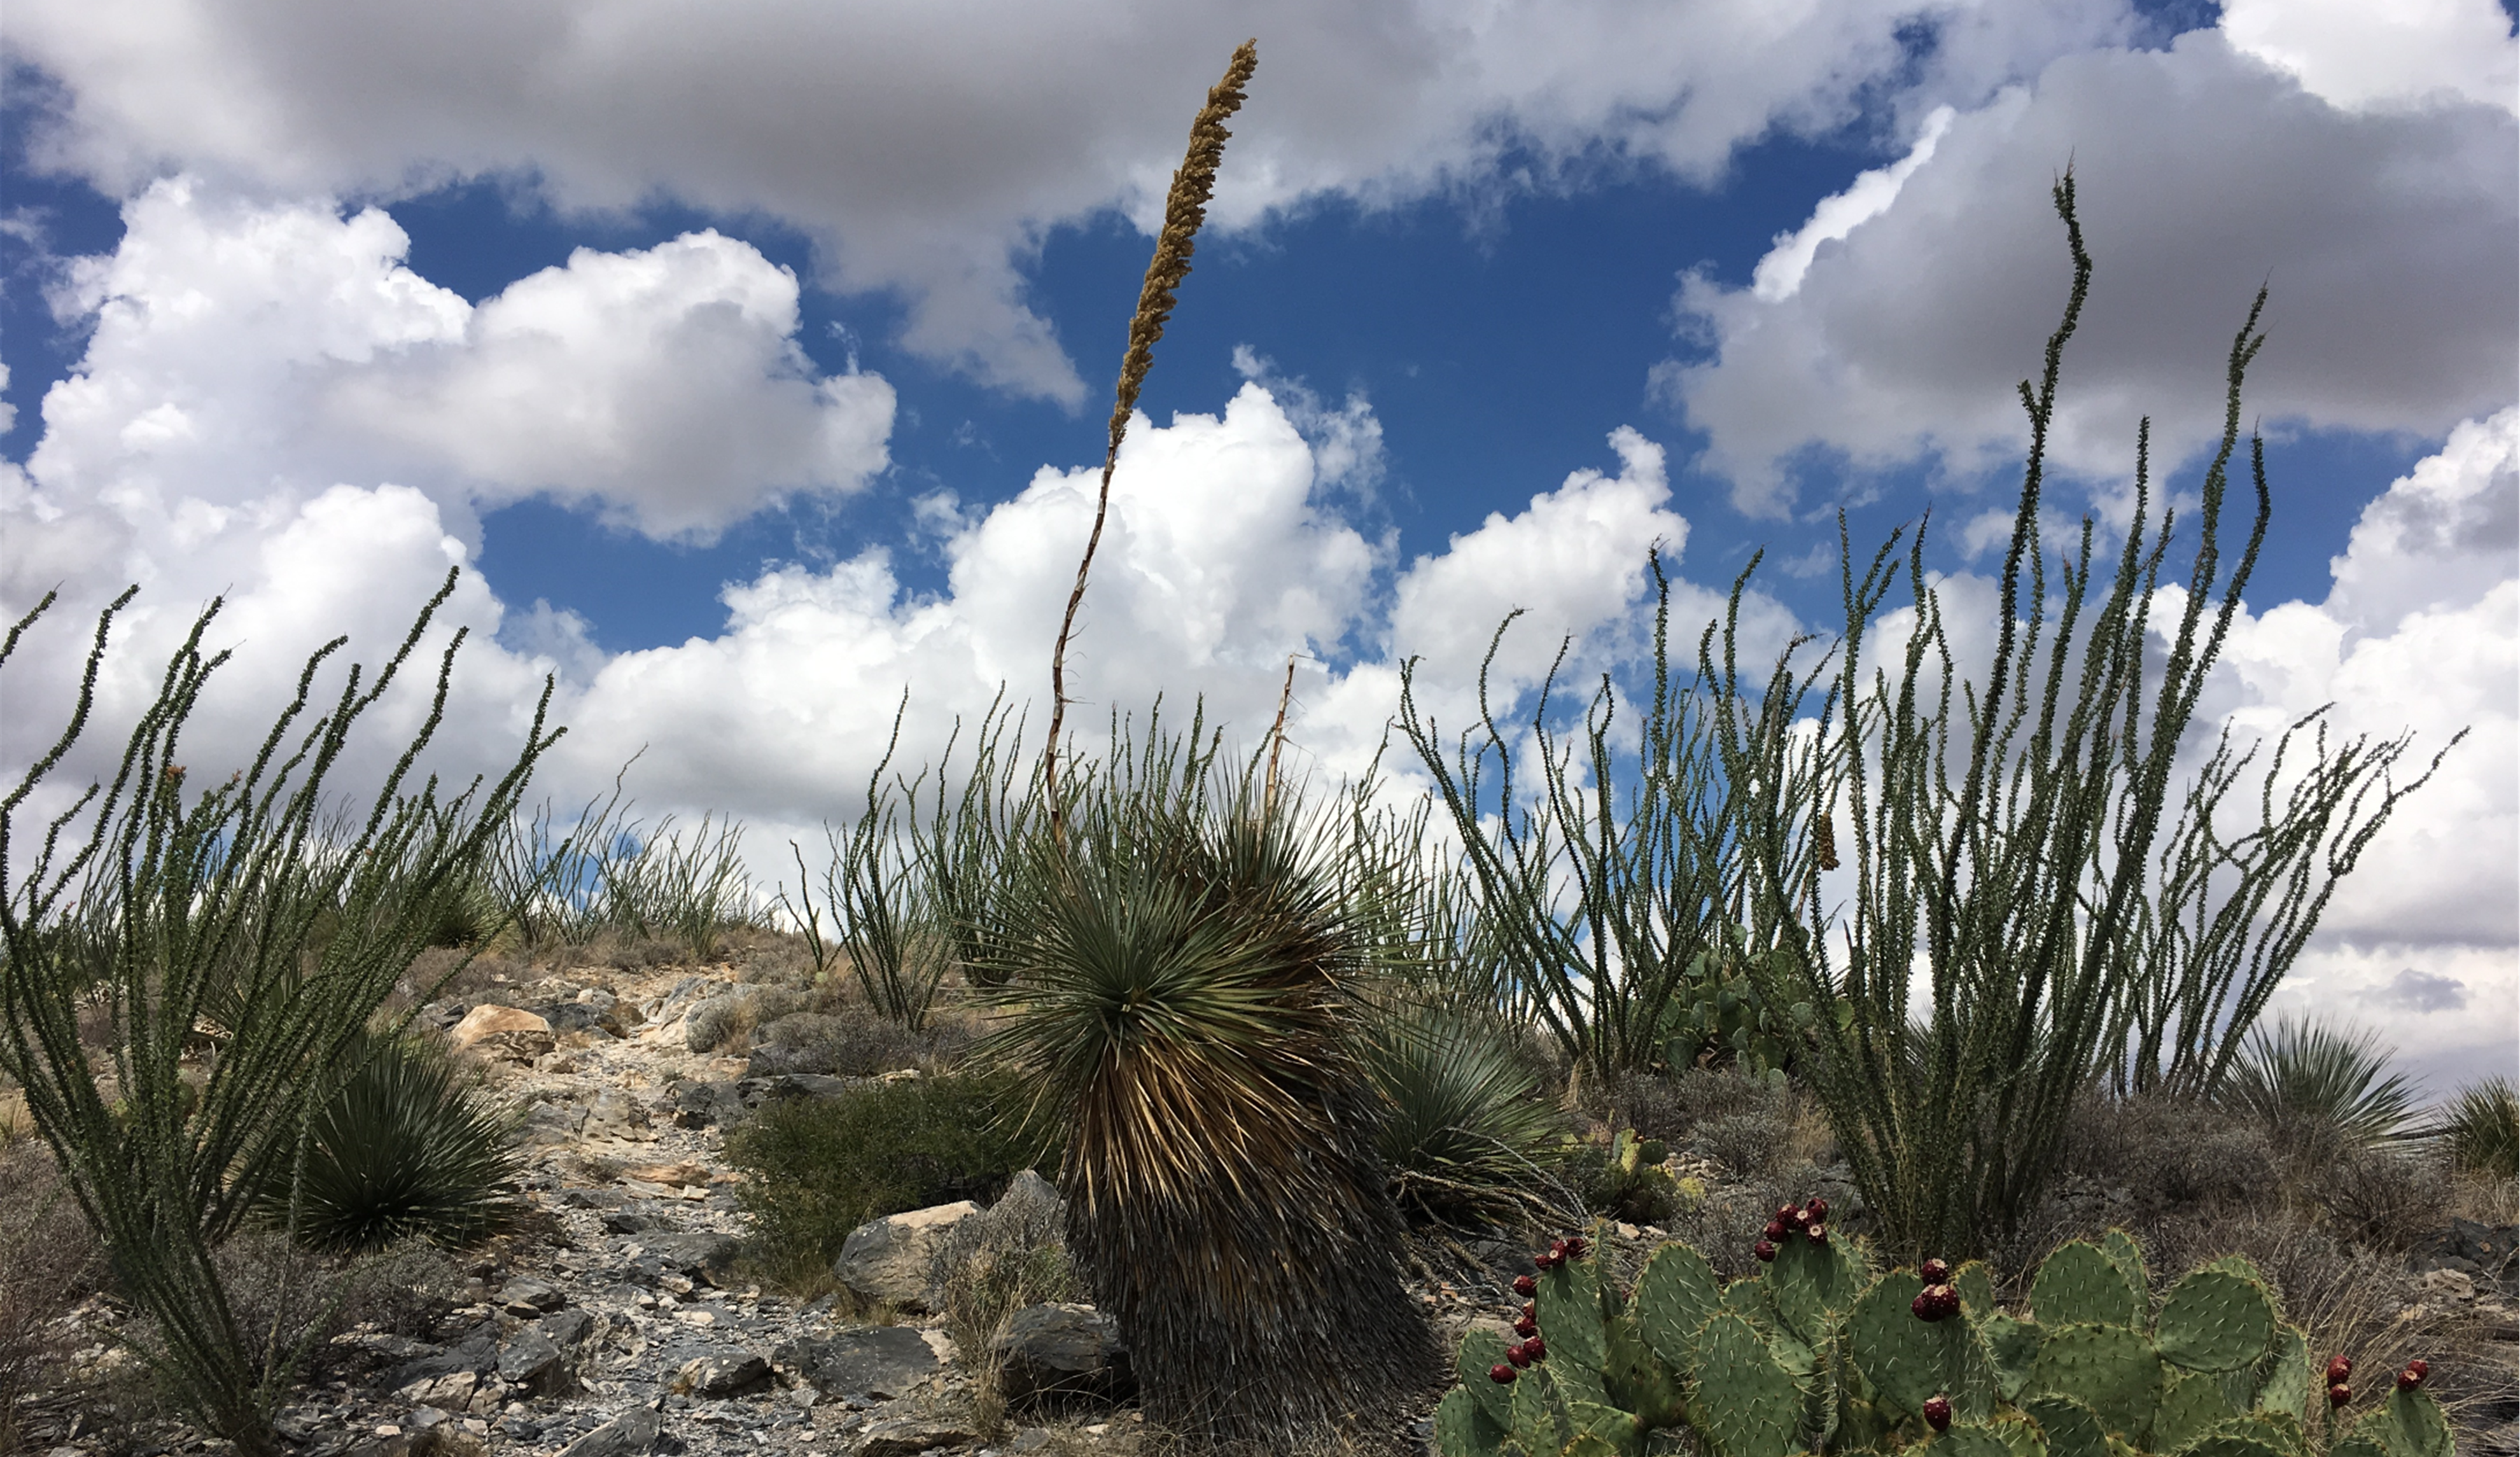 Plants on mountain rocky terrain with clouds and blue sky.